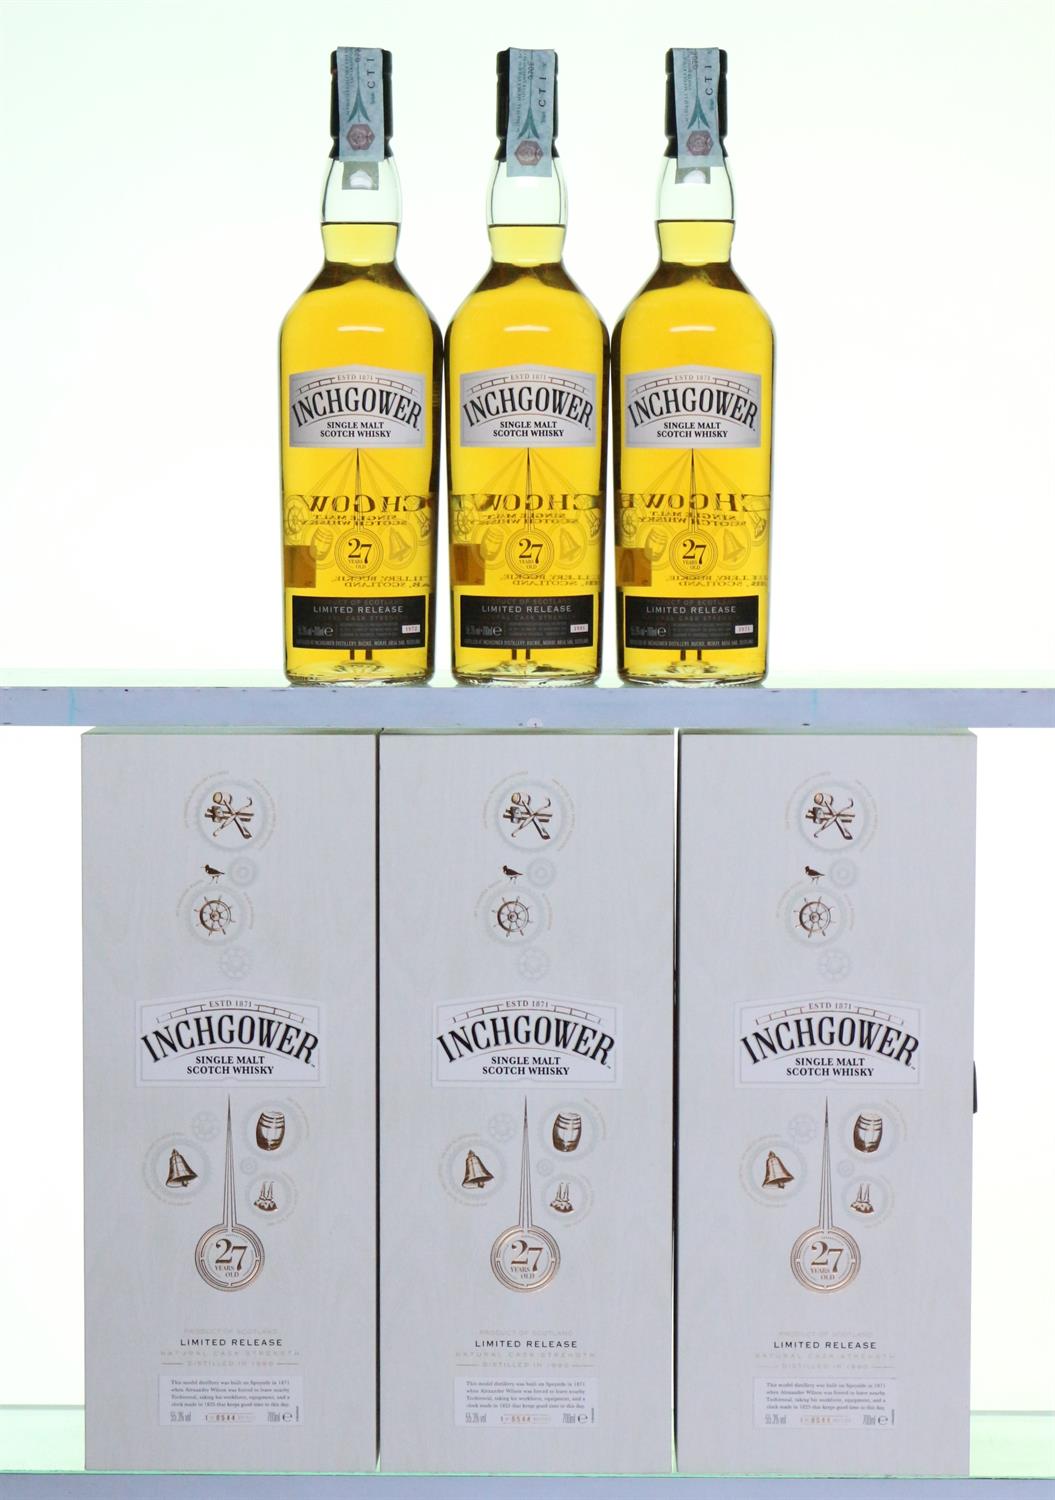 Inchgower Limited Release 27 Year Single Malt Whisky